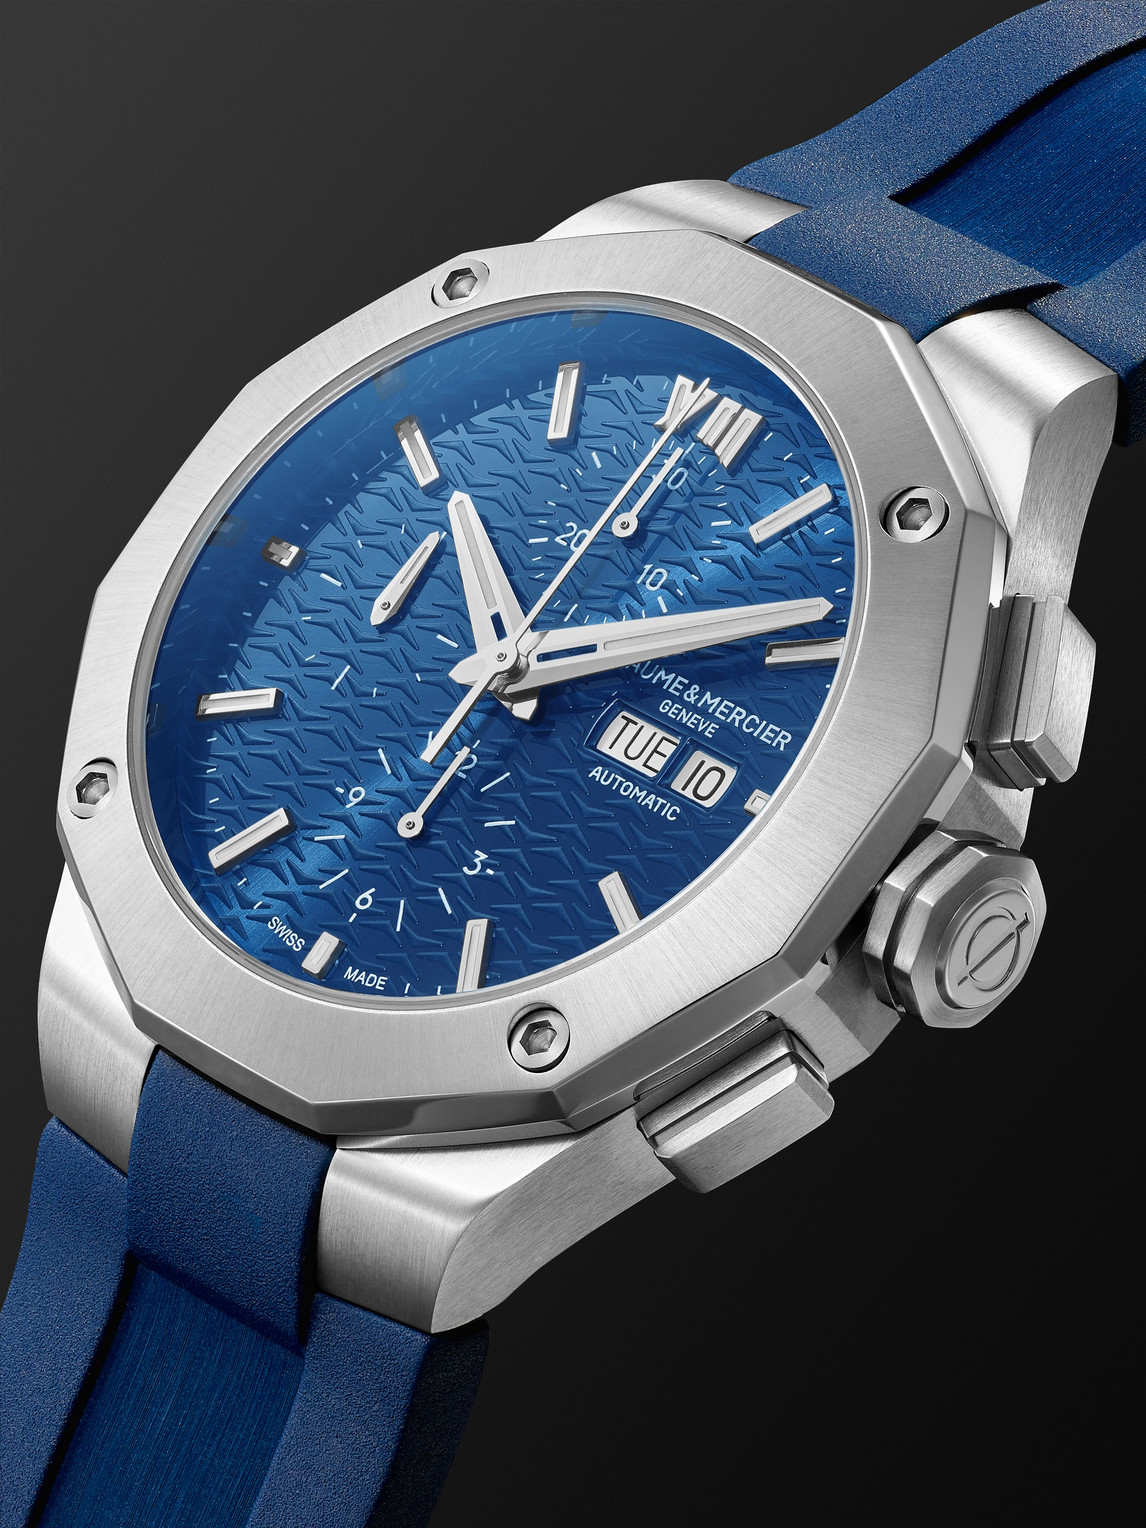 Shop Baume & Mercier Riviera Baumatic Automatic Chronograph 43mm Stainless Steel And Rubber Watch, Ref. No. M0a10623 In Blue